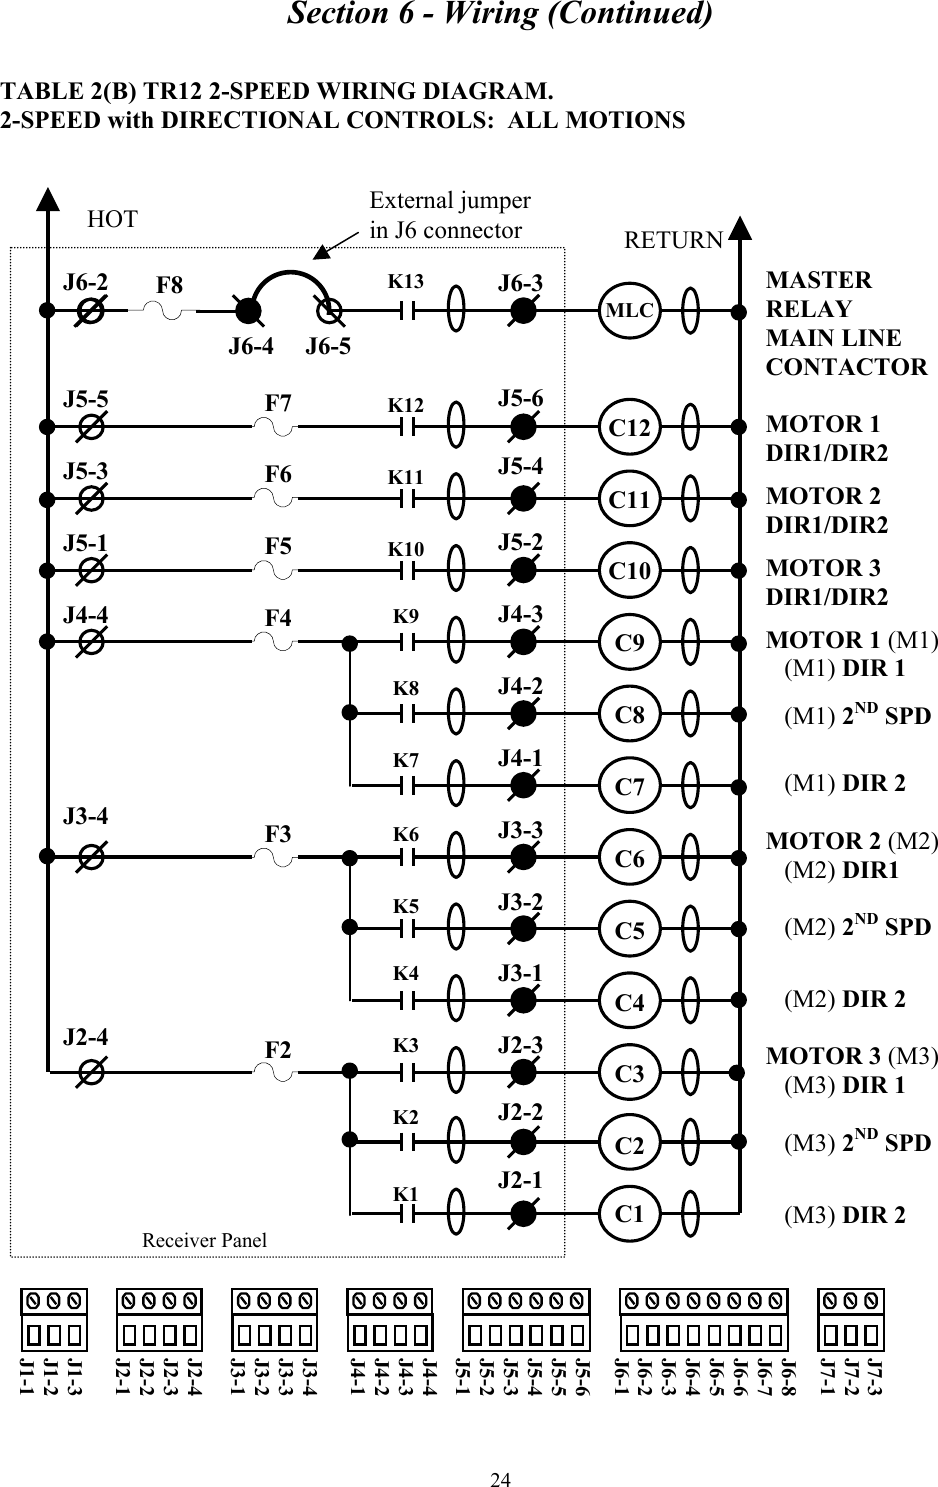 Section 6 - Wiring (Continued) 24 TABLE 2(B) TR12 2-SPEED WIRING DIAGRAM. 2-SPEED with DIRECTIONAL CONTROLS:  ALL MOTIONS   MASTER  RELAY MAIN LINE CONTACTOR  MOTOR 1 DIR1/DIR2  MOTOR 2 DIR1/DIR2  MOTOR 3 DIR1/DIR2  MOTOR 1 (M1)    (M1) DIR 1     (M1) 2ND SPD      (M1) DIR 2  MOTOR 2 (M2)    (M2) DIR1     (M2) 2ND SPD     (M2) DIR 2  MOTOR 3 (M3)    (M3) DIR 1     (M3) 2ND SPD     (M3) DIR 2       Receiver Panel J6-2    J5-5  J5-3  J5-1  J4-4      J3-4        J2-4 J6-3    J5-6  J5-4   J5-2  J4-3  J4-2  J4-1  J3-3  J3-2  J3-1  J2-3  J2-2  J2-1 HOT  RETURN K13     K12   K11   K10   K9   K8   K7   K6   K5   K4   K3   K2   K1 MLC    C12  C11  C10  C9  C8  C7  C6  C5  C4  C3  C2  C1     F7  F6  F5  F4      F3        F2  J7-3 J7-2 J7-1  J6-8 J6-7 J6-6 J6-5 J6-4 J6-3 J6-2 J6-1   J5-6 J5-5 J5-4 J5-3 J5-2 J5-1  J4-4 J4-3 J4-2 J4-1  J3-4 J3-3 J3-2 J3-1  J2-4 J2-3 J2-2 J2-1  J1-3 J1-2 J1-1 External jumper in J6 connector J6-4     J6-5 F8 